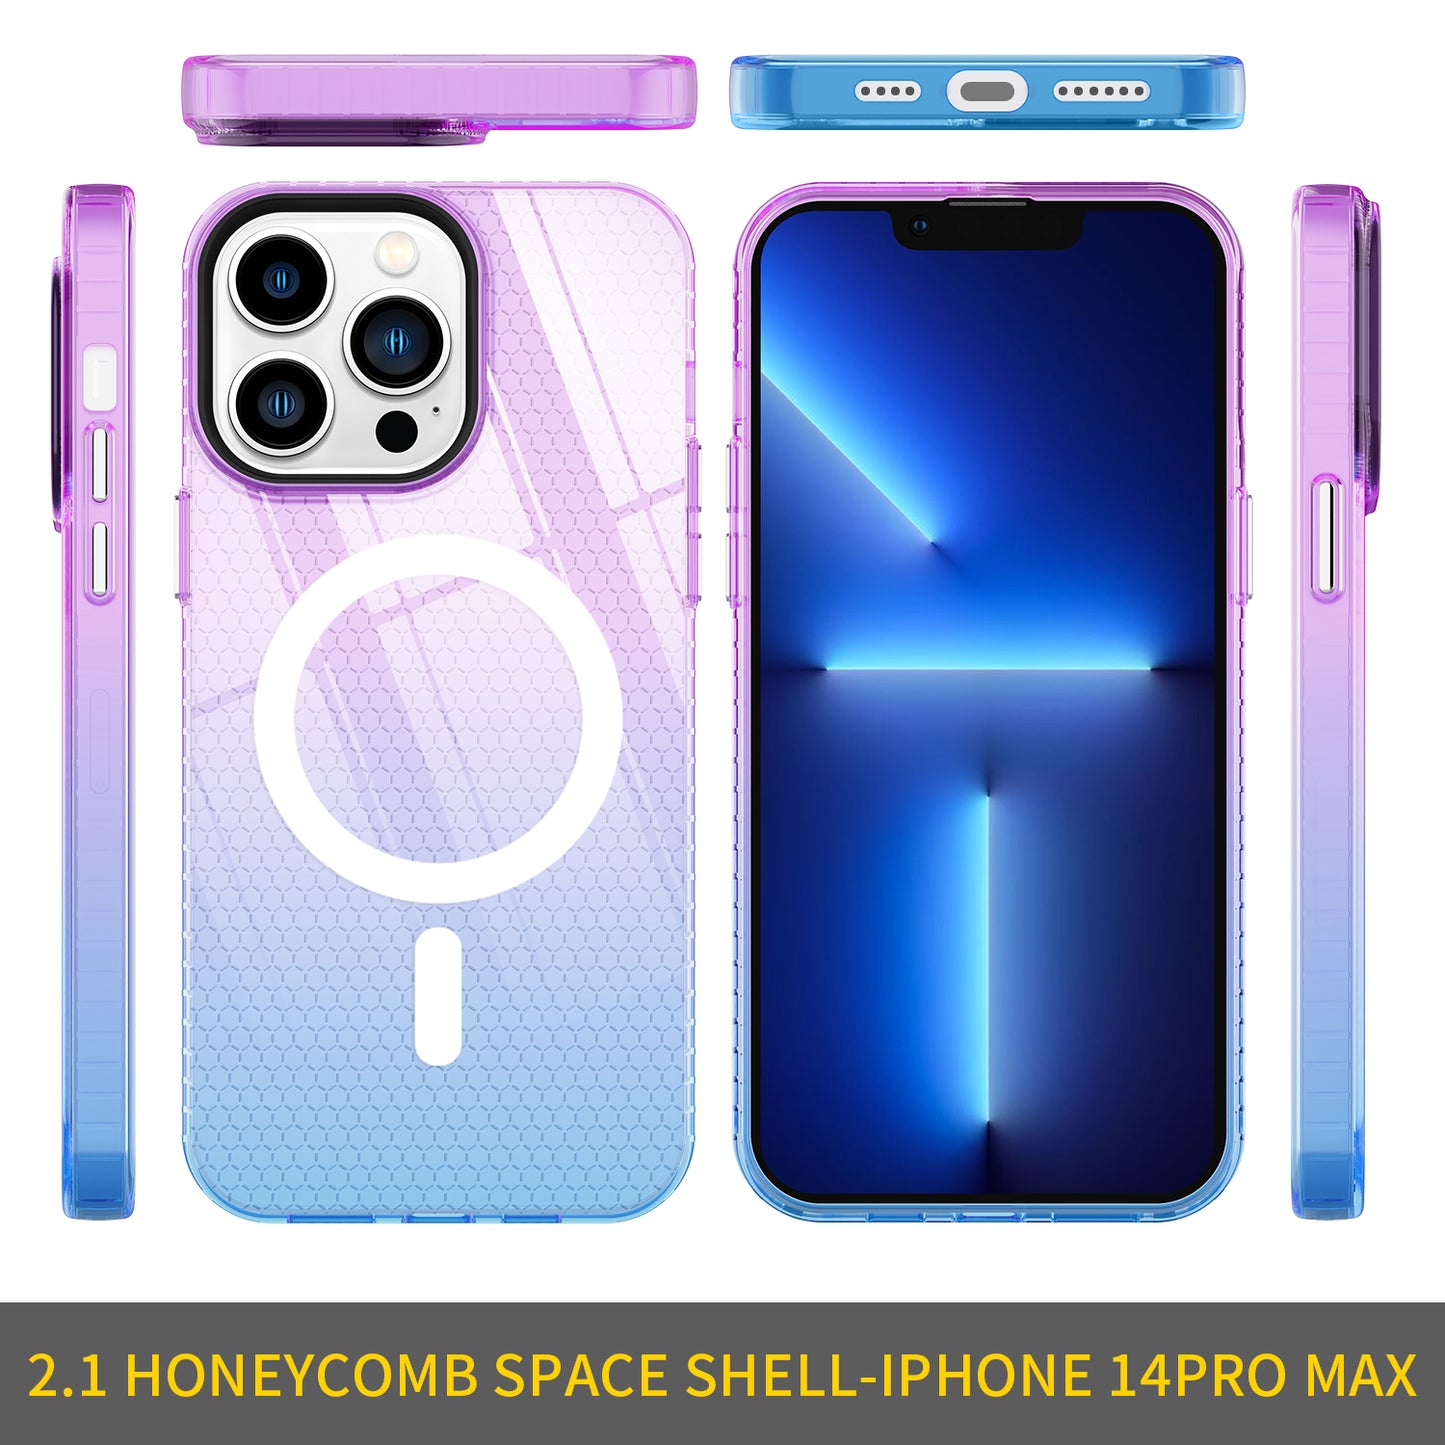 New trending colorful wireless charging phone case tpu magnetic phone case for iphone 14 pro max